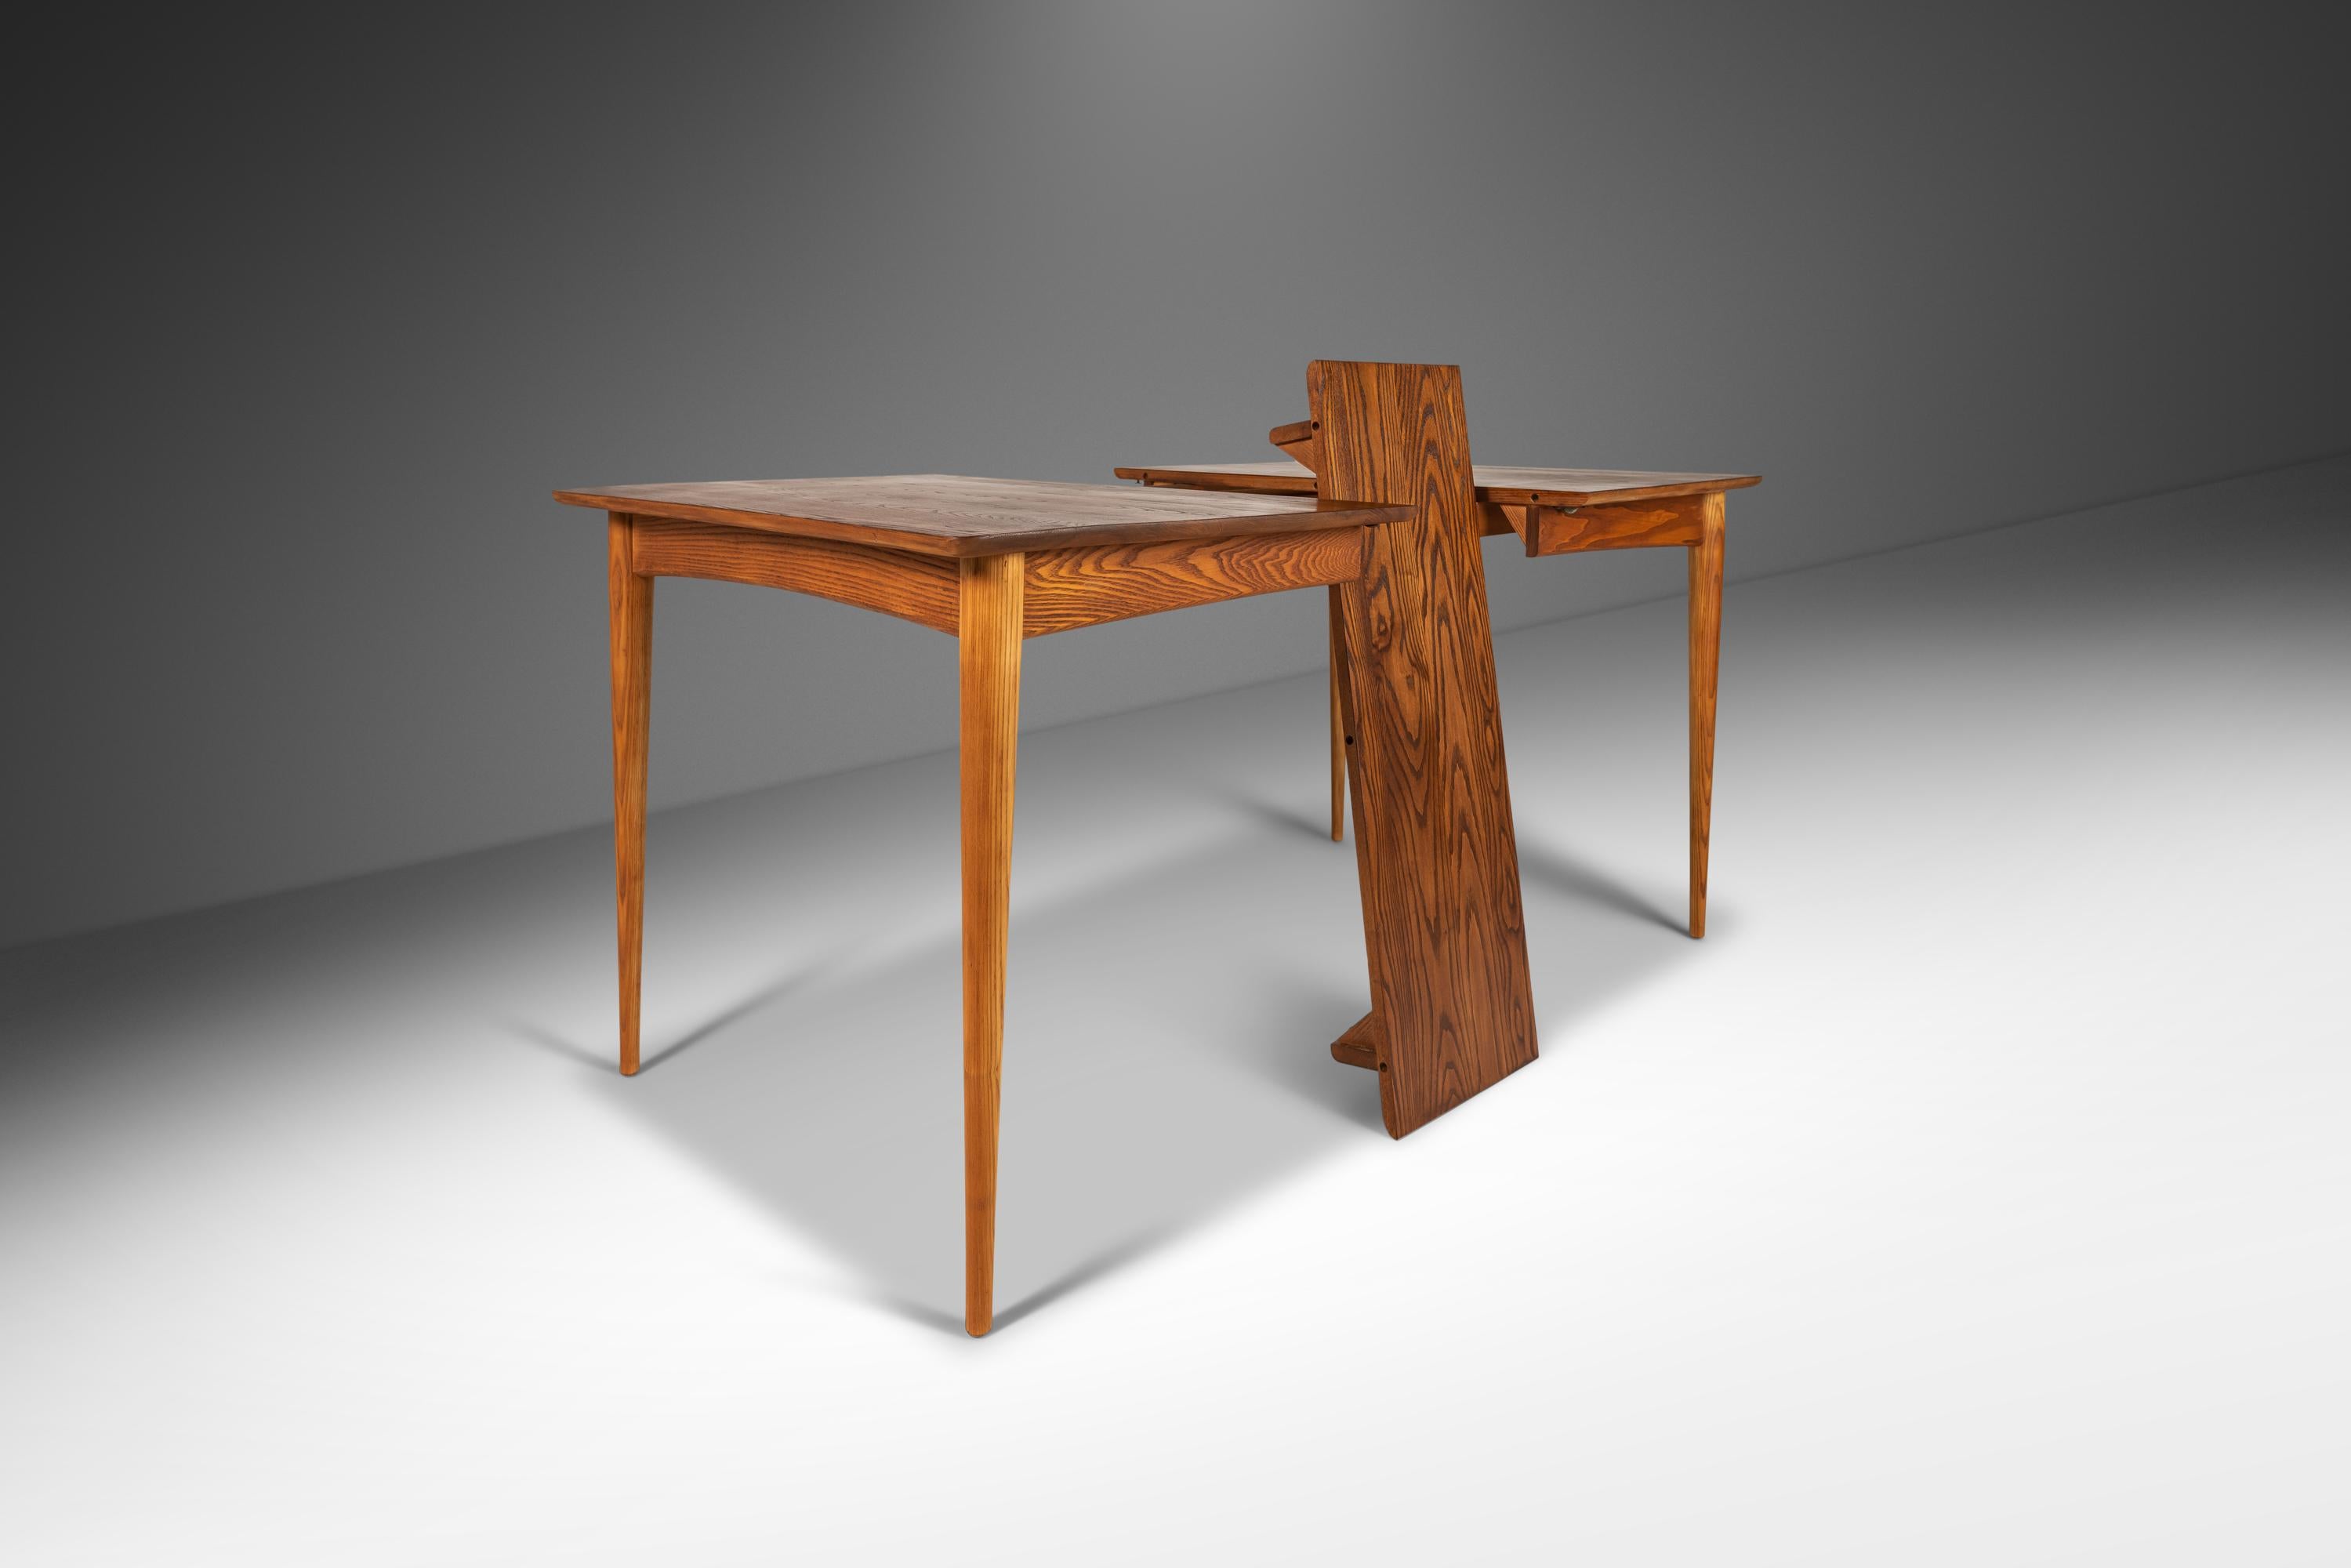 Angular Mid-Century Modern Extension Dining Table in Solid Oak, Usa, circa 1960s For Sale 4